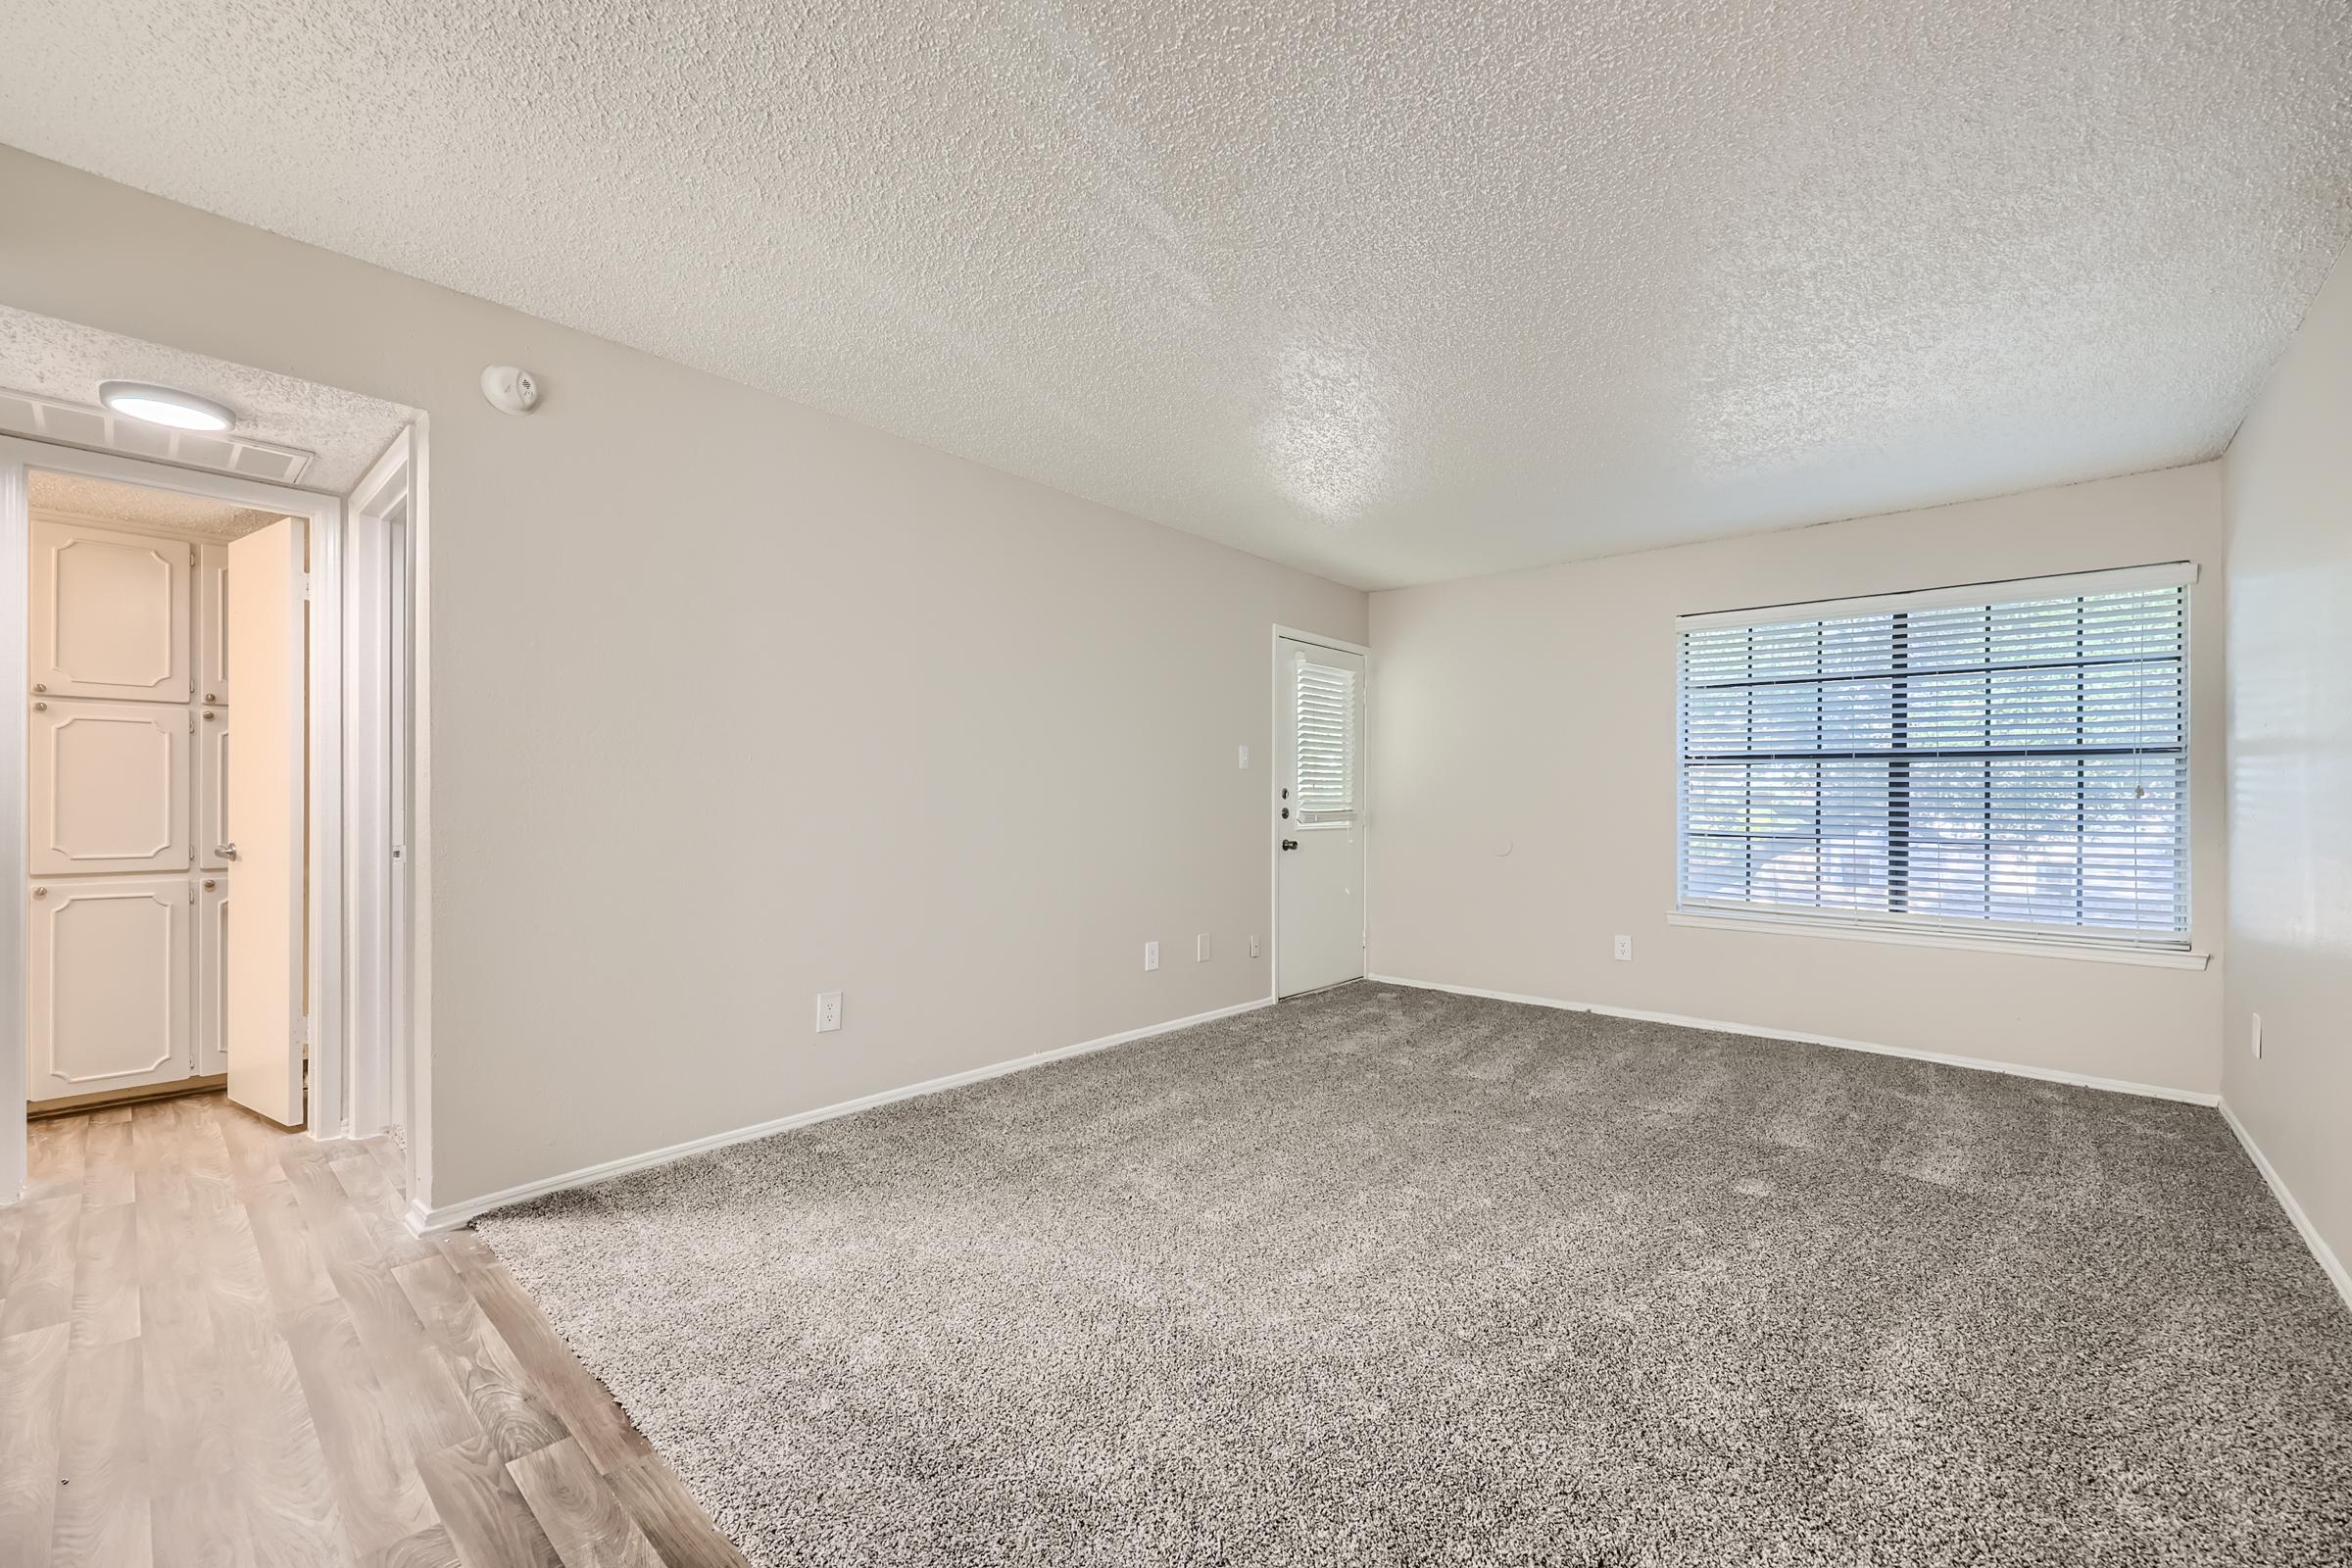 A carpeted living room with a large window in an apartment at Rise Oak Creek.